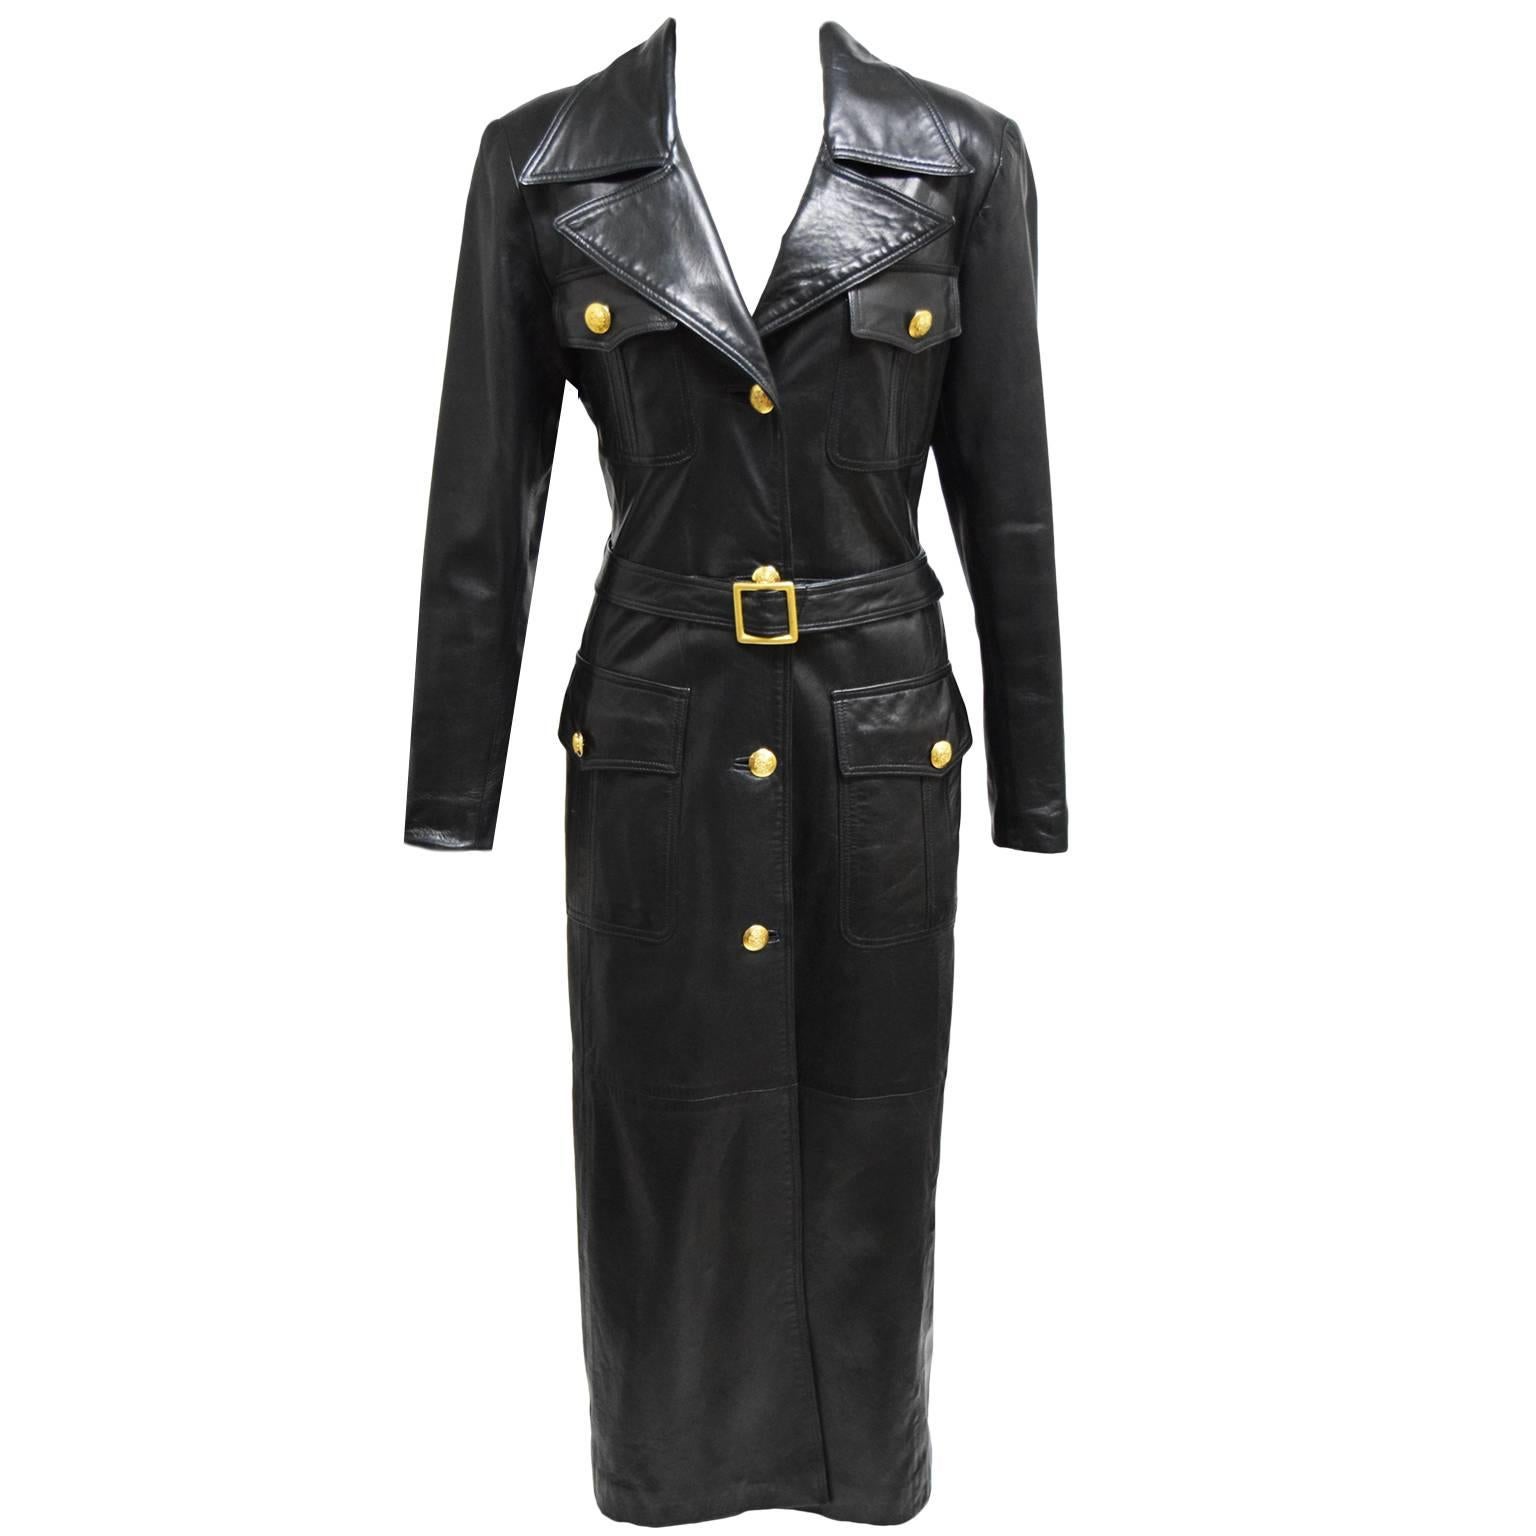 La Nouvelle Renaissance Black Leather Trench Coat with Gold Hardware and belt For Sale